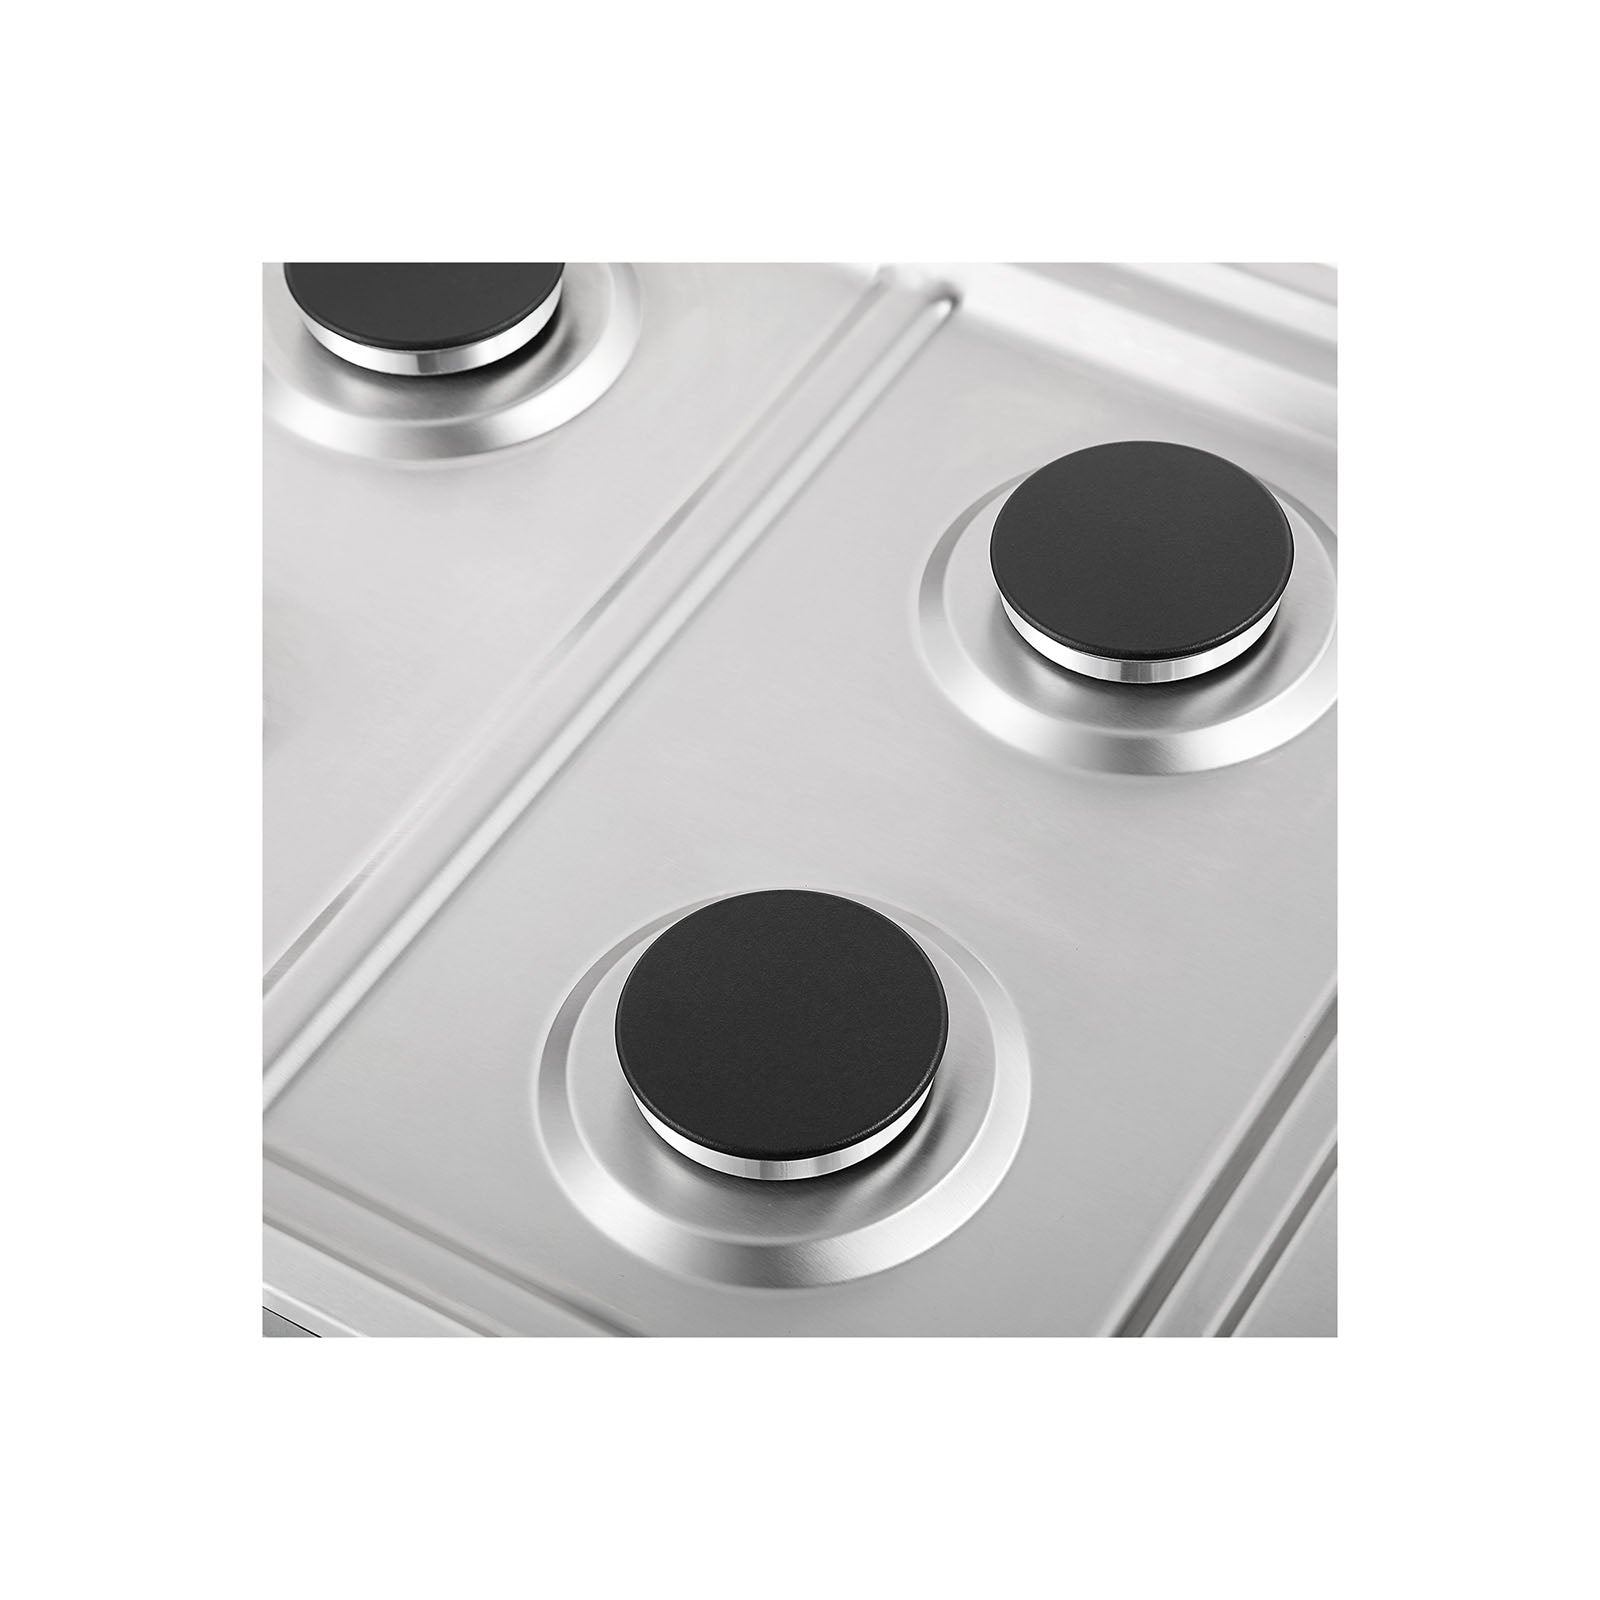 Empava 30GC33 30 in. Built-in Stainless Steel Gas Cooktop